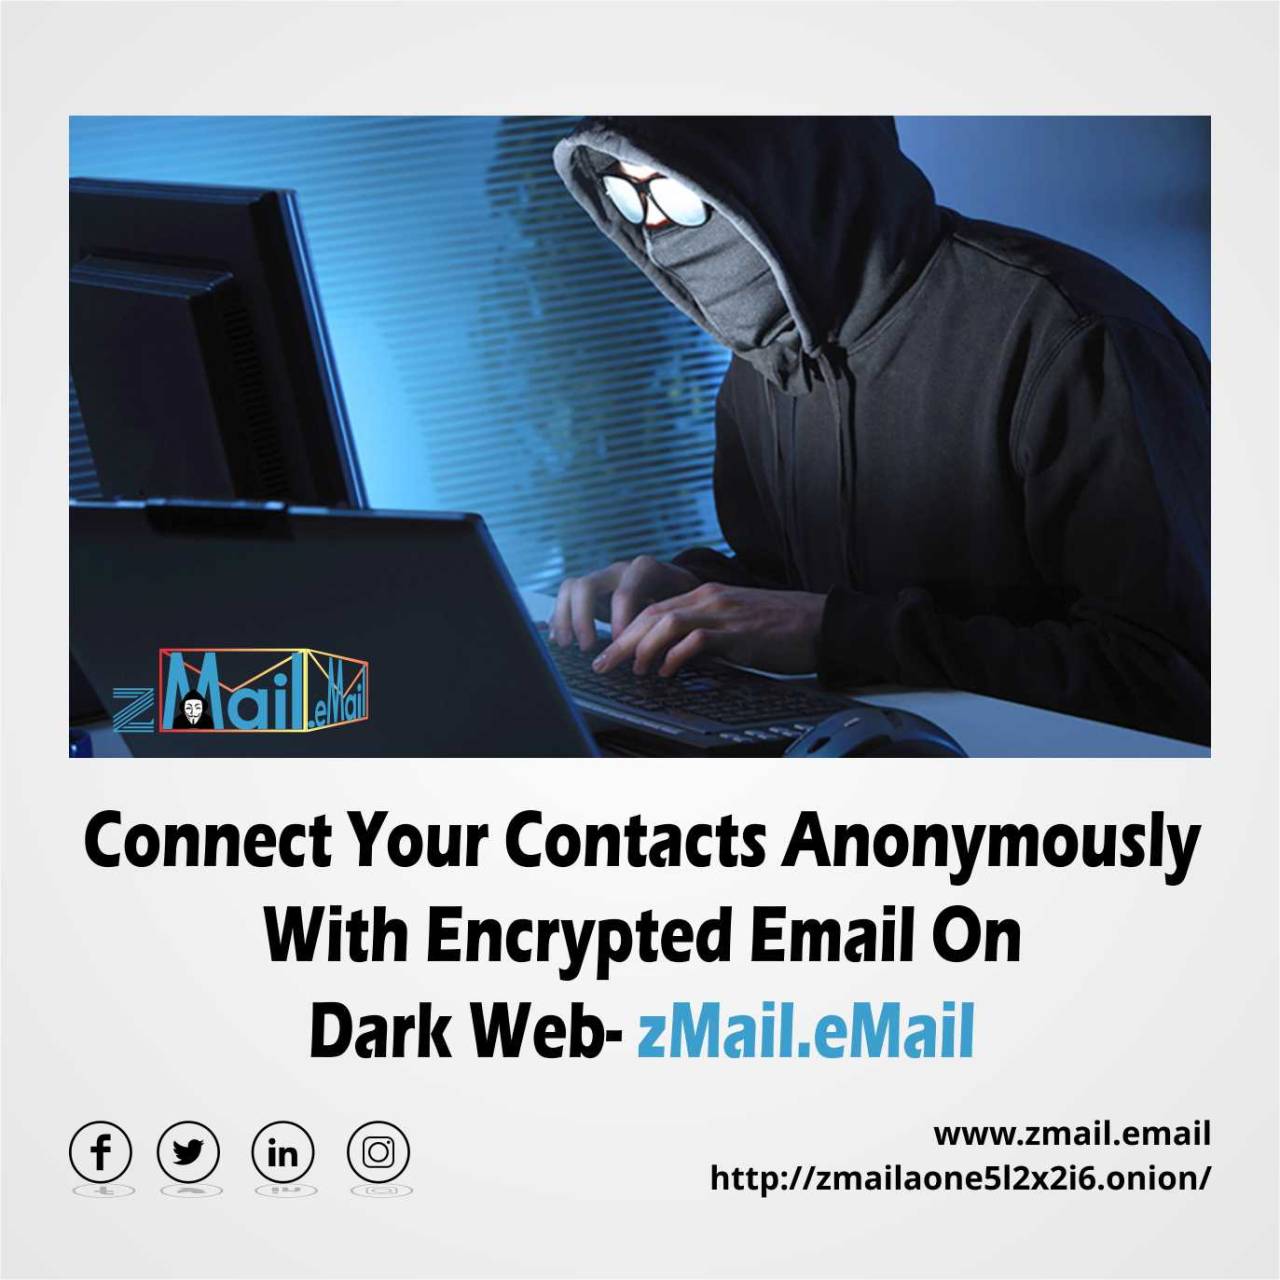 anonymous email software download